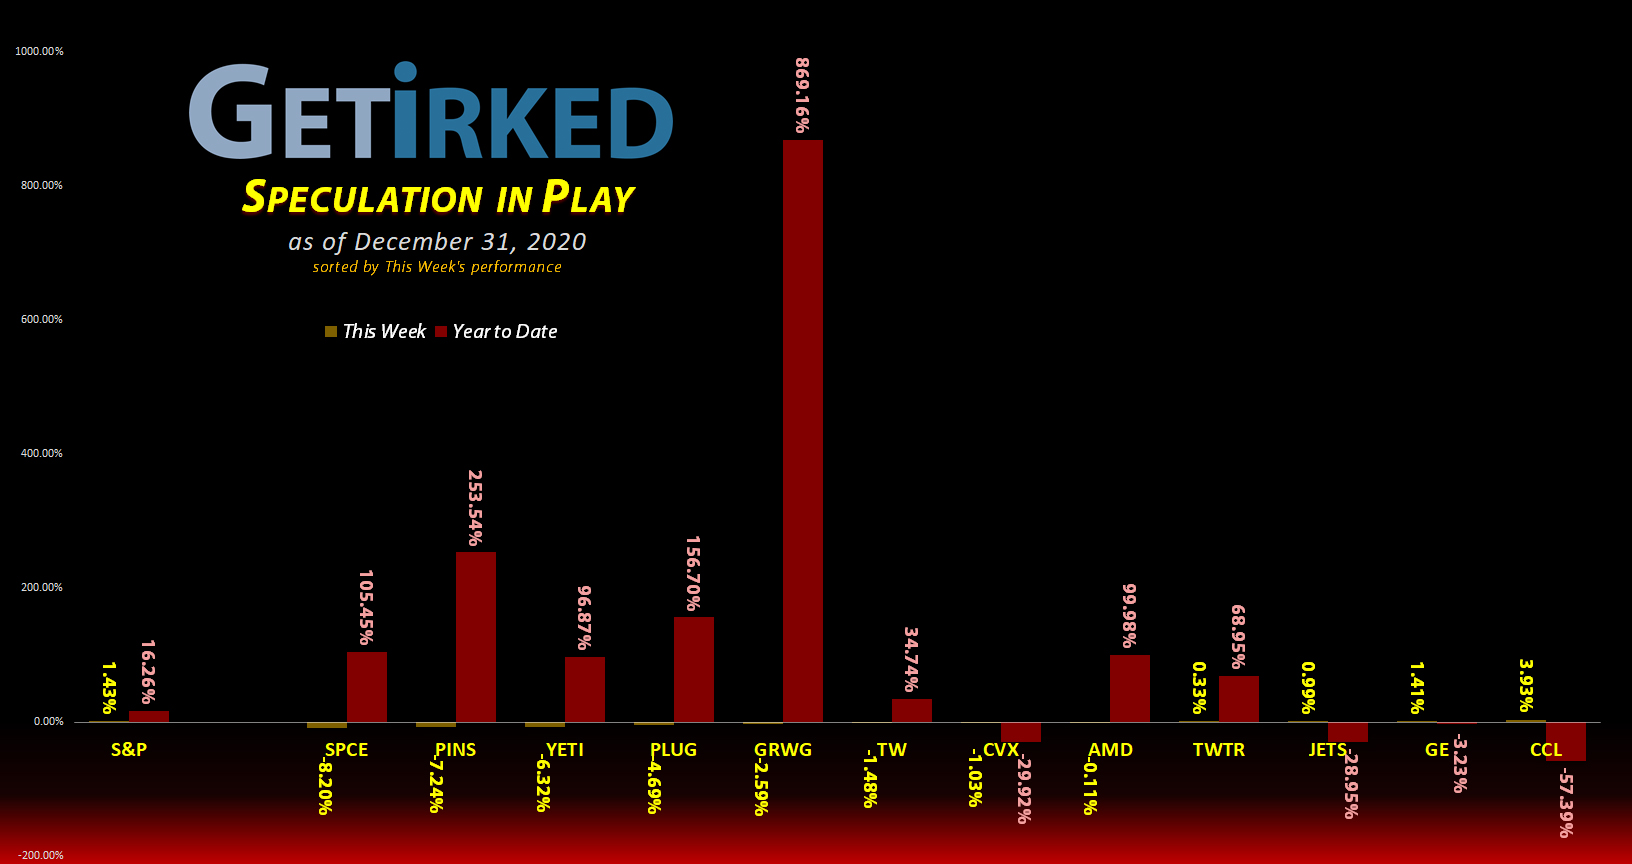 Get Irked's Speculation in Play - December 31, 2020